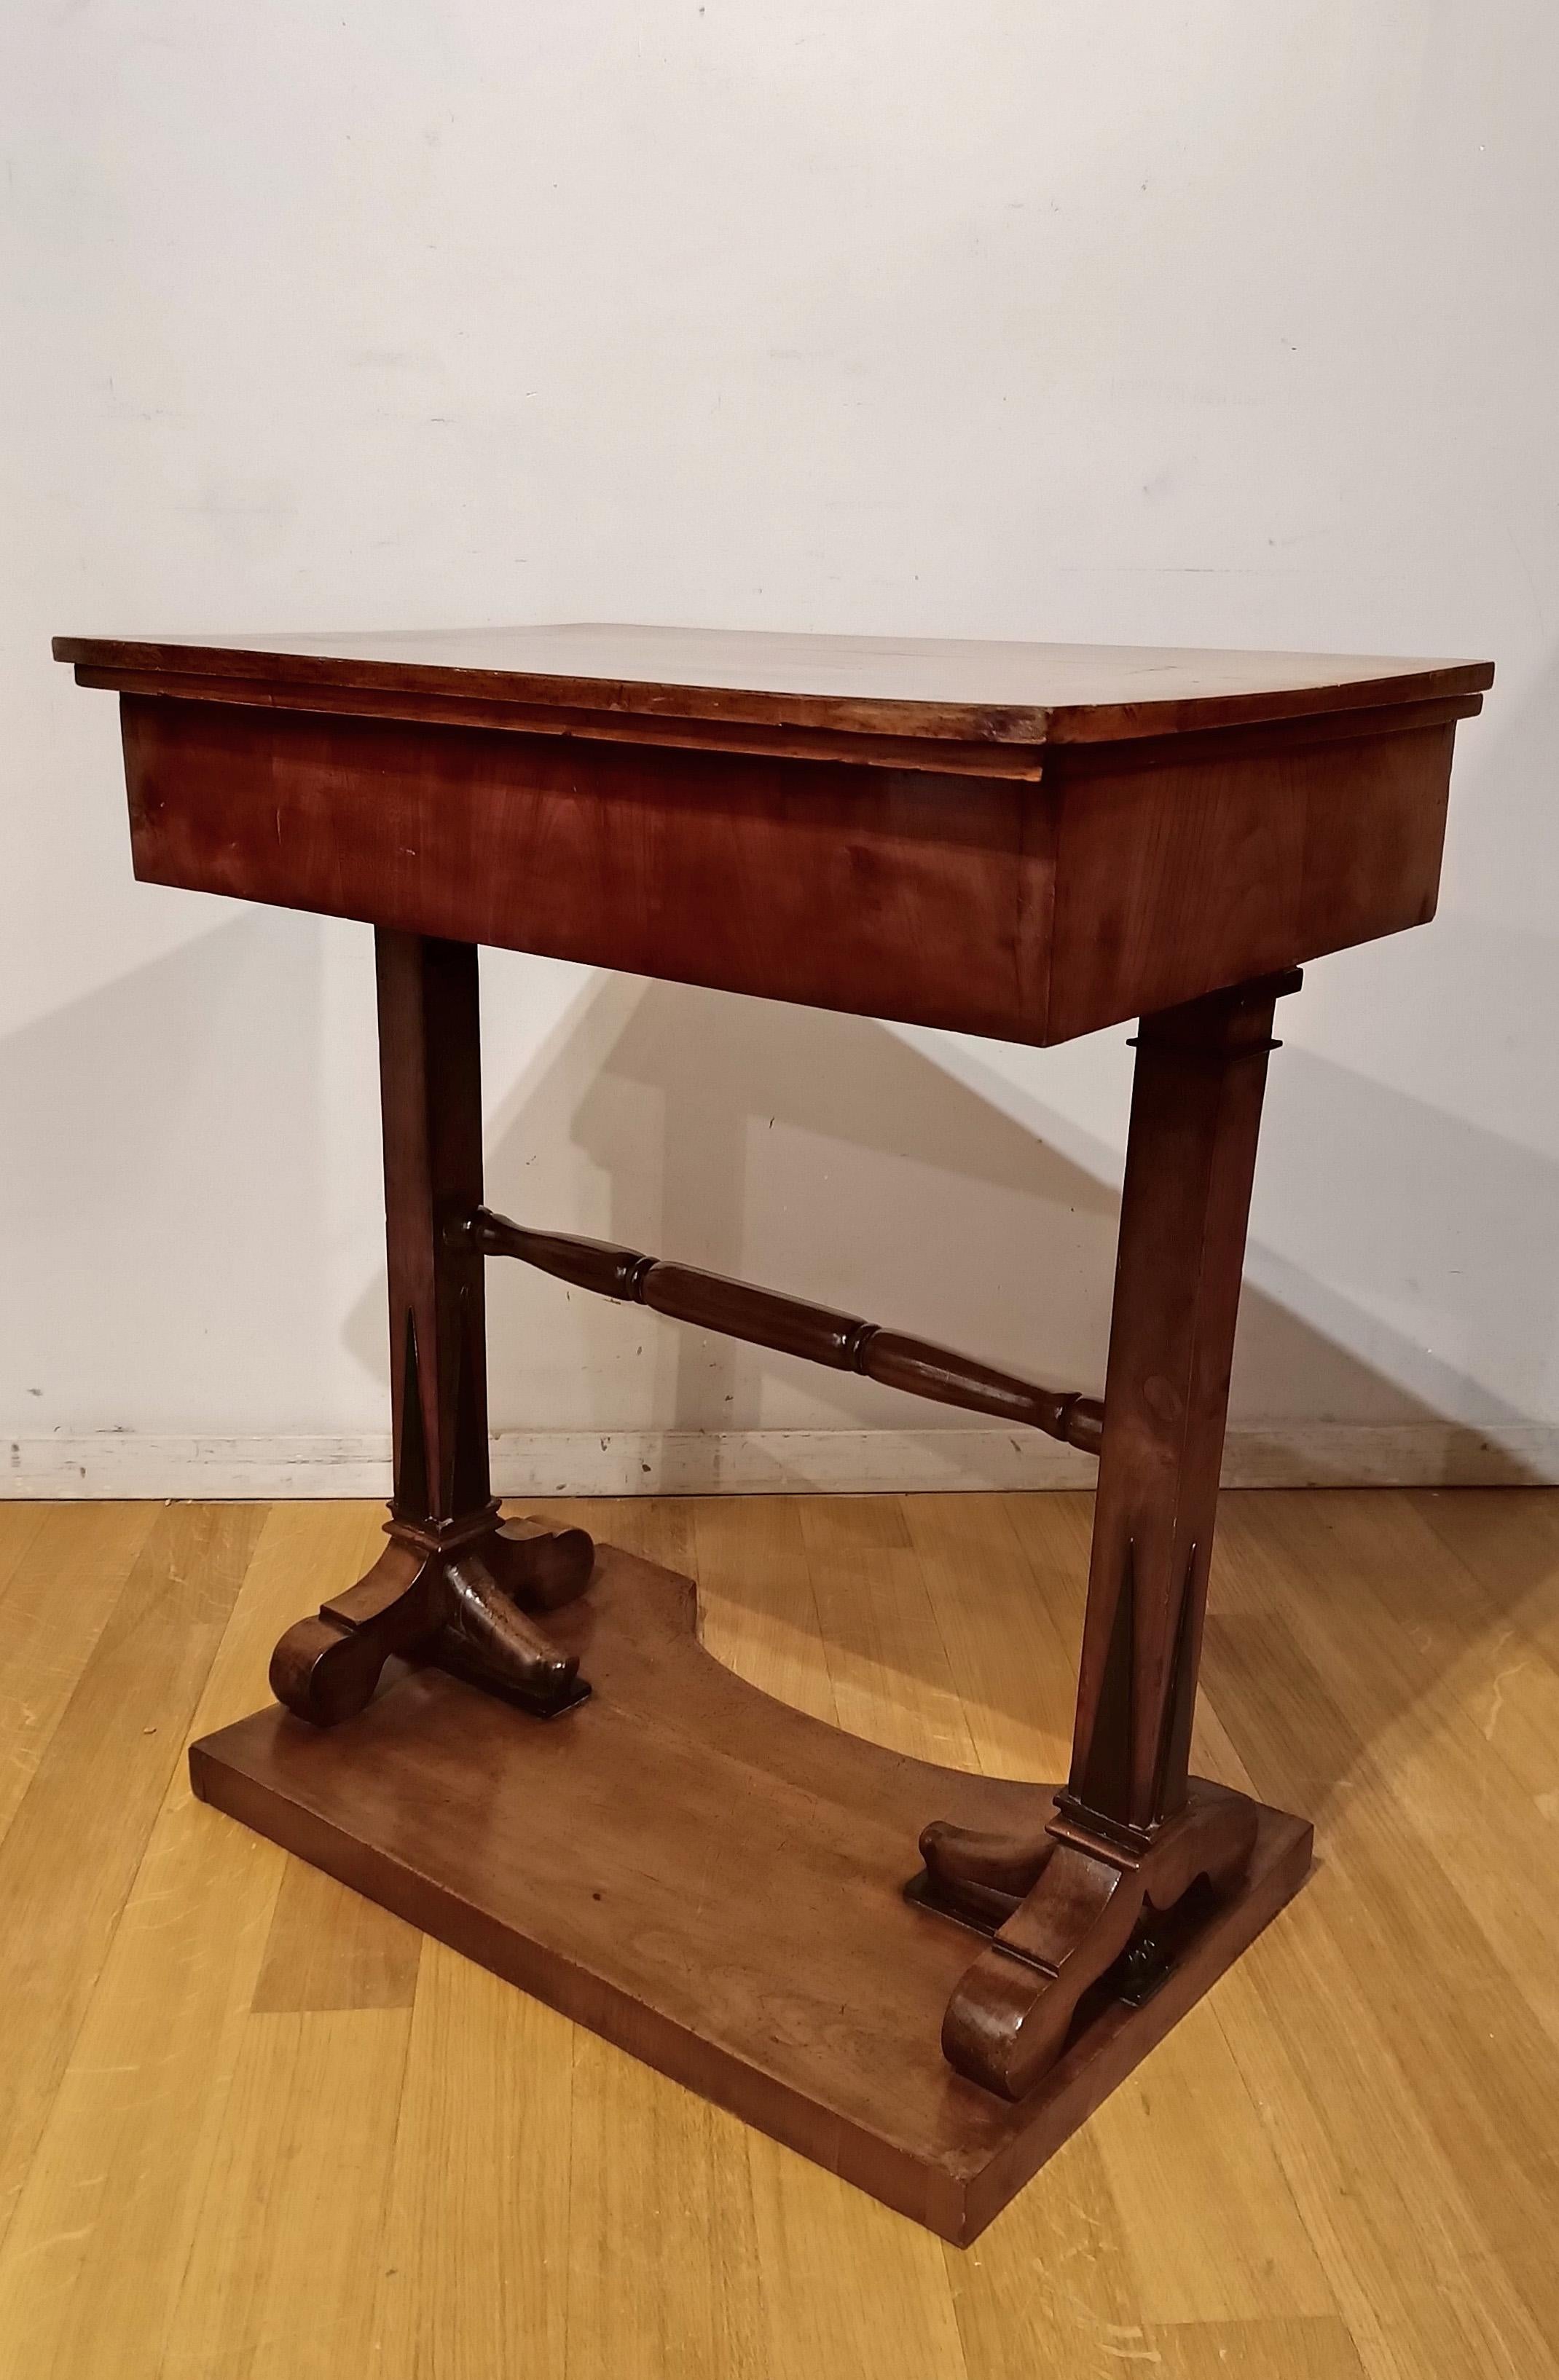 EARLY 19th CENTURY SMALL WORKING TABLE In Good Condition For Sale In Firenze, FI